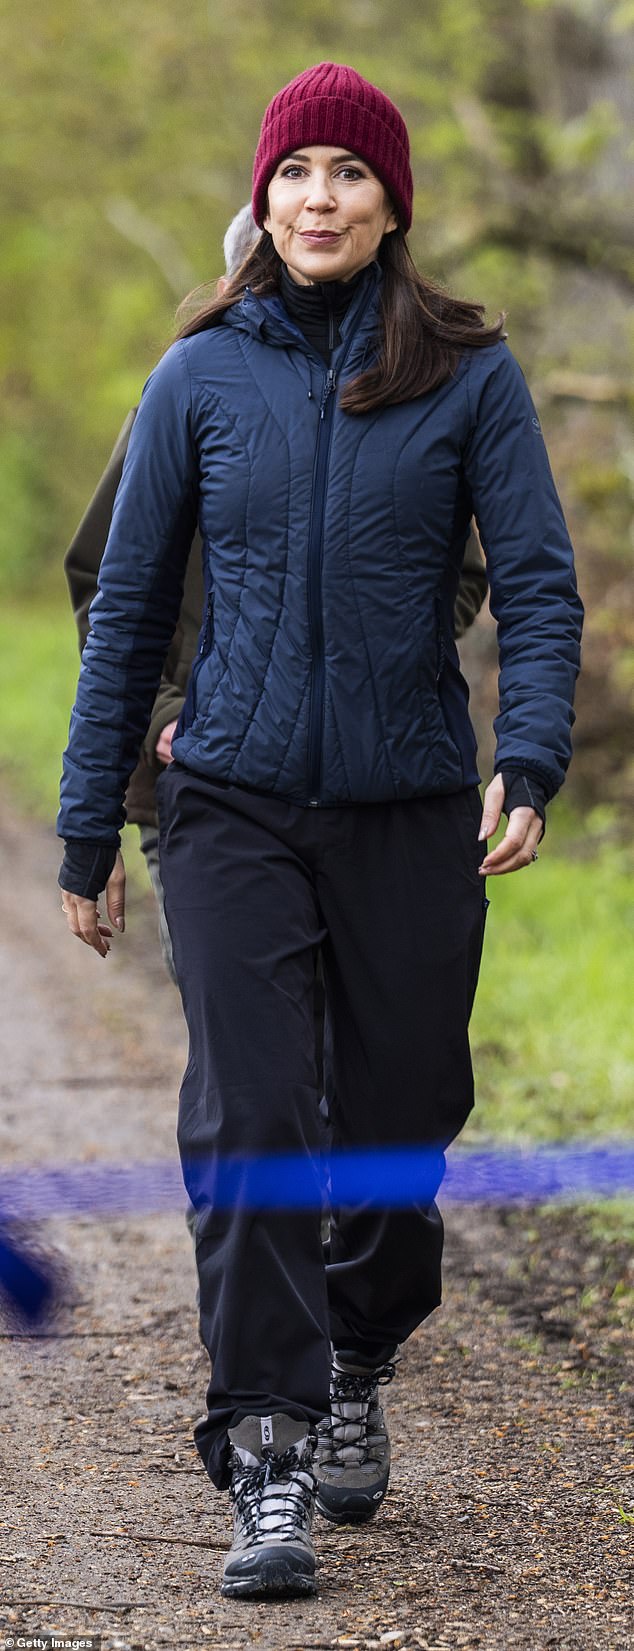 The royal paired her hiking gear with a trendy maroon knit hat, ideal for the current climate.